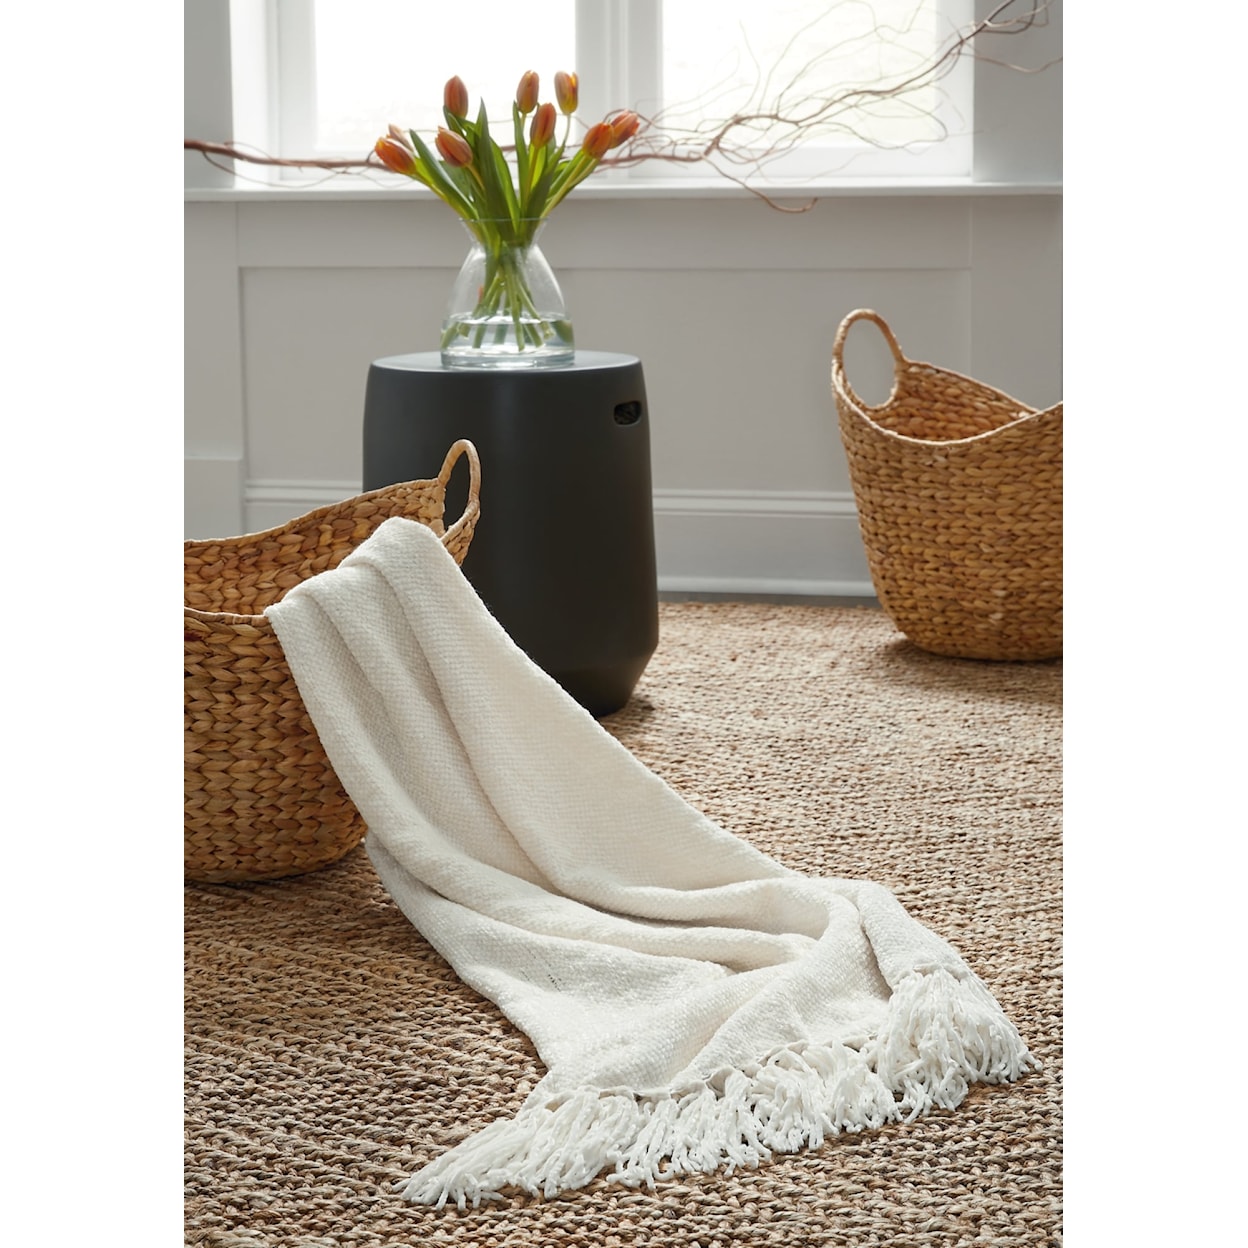 Signature Design by Ashley Tamish Throw Blanket (Set of 3)